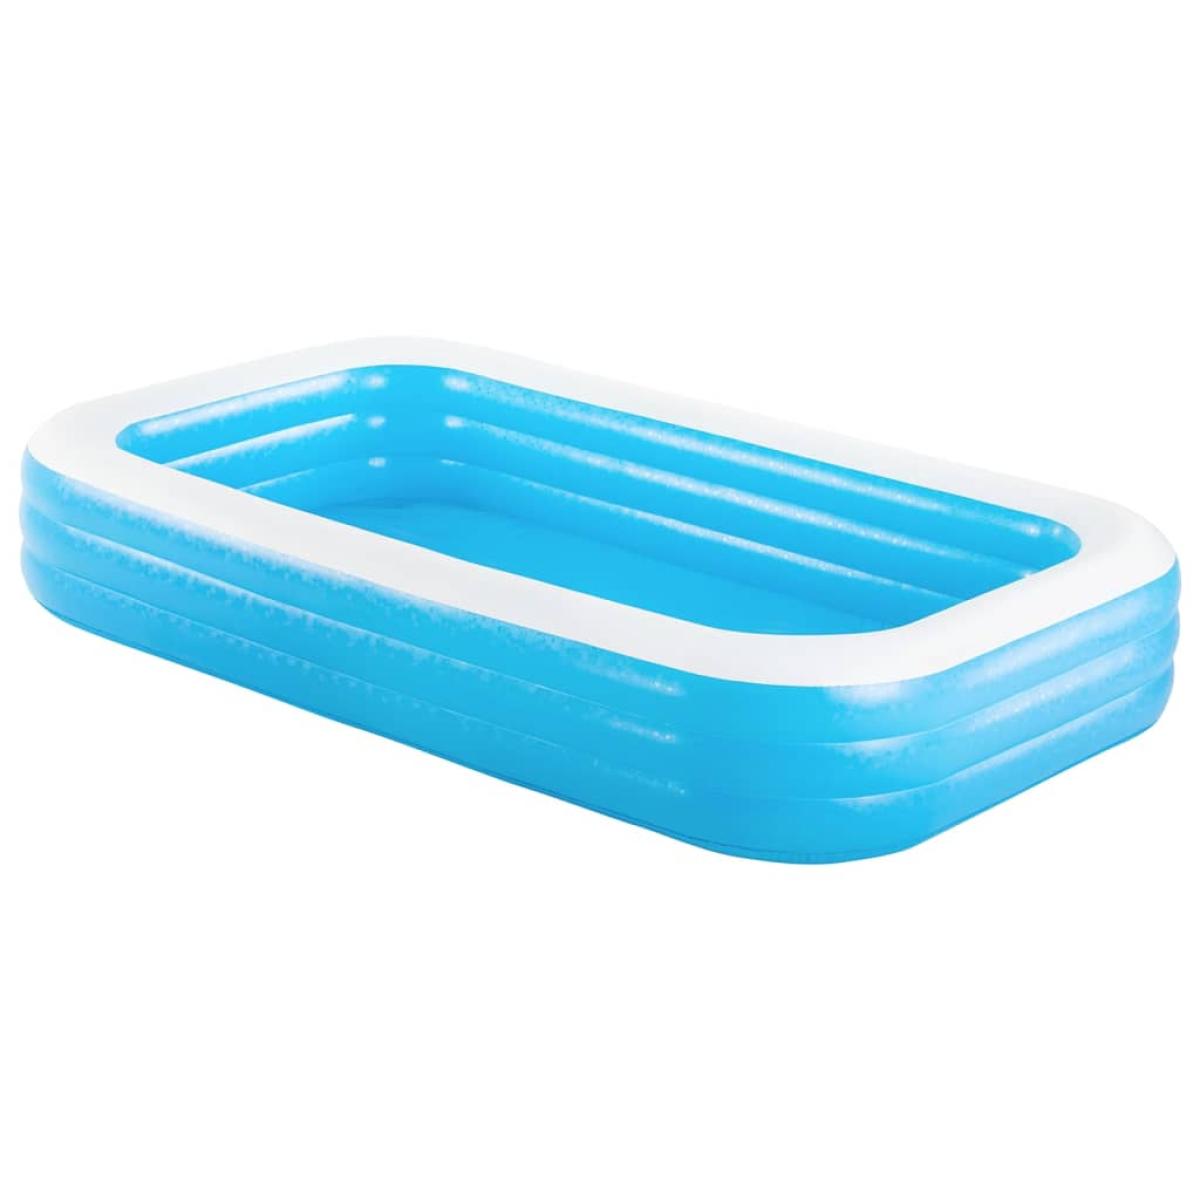 Piscina inflable 305x183x56 cm